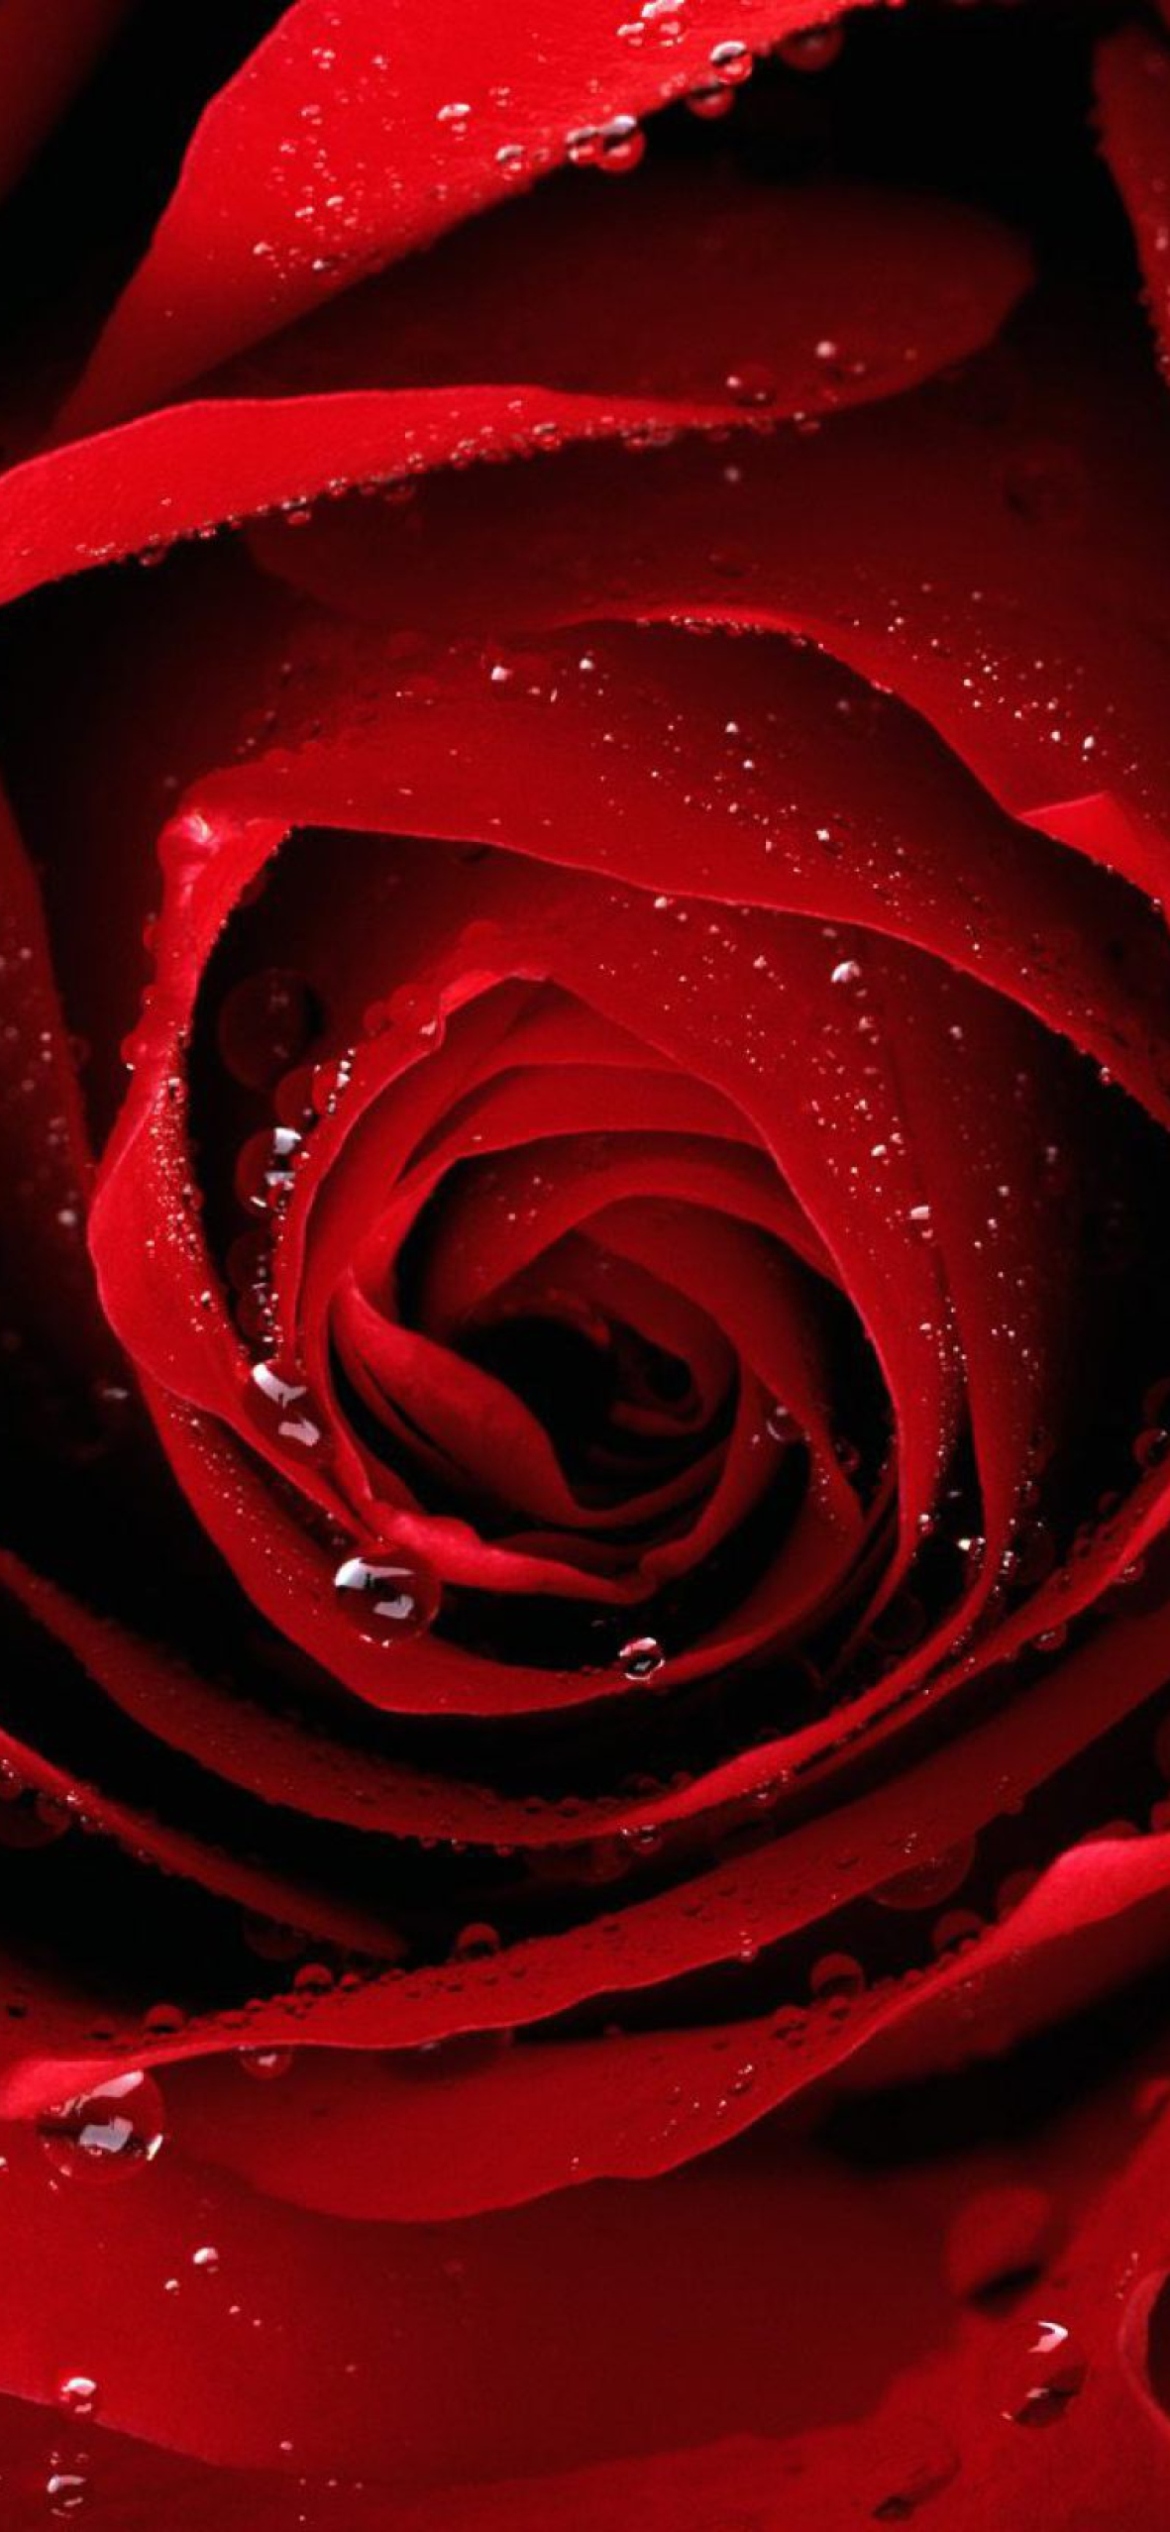 Scarlet Rose With Water Drops wallpaper 1170x2532